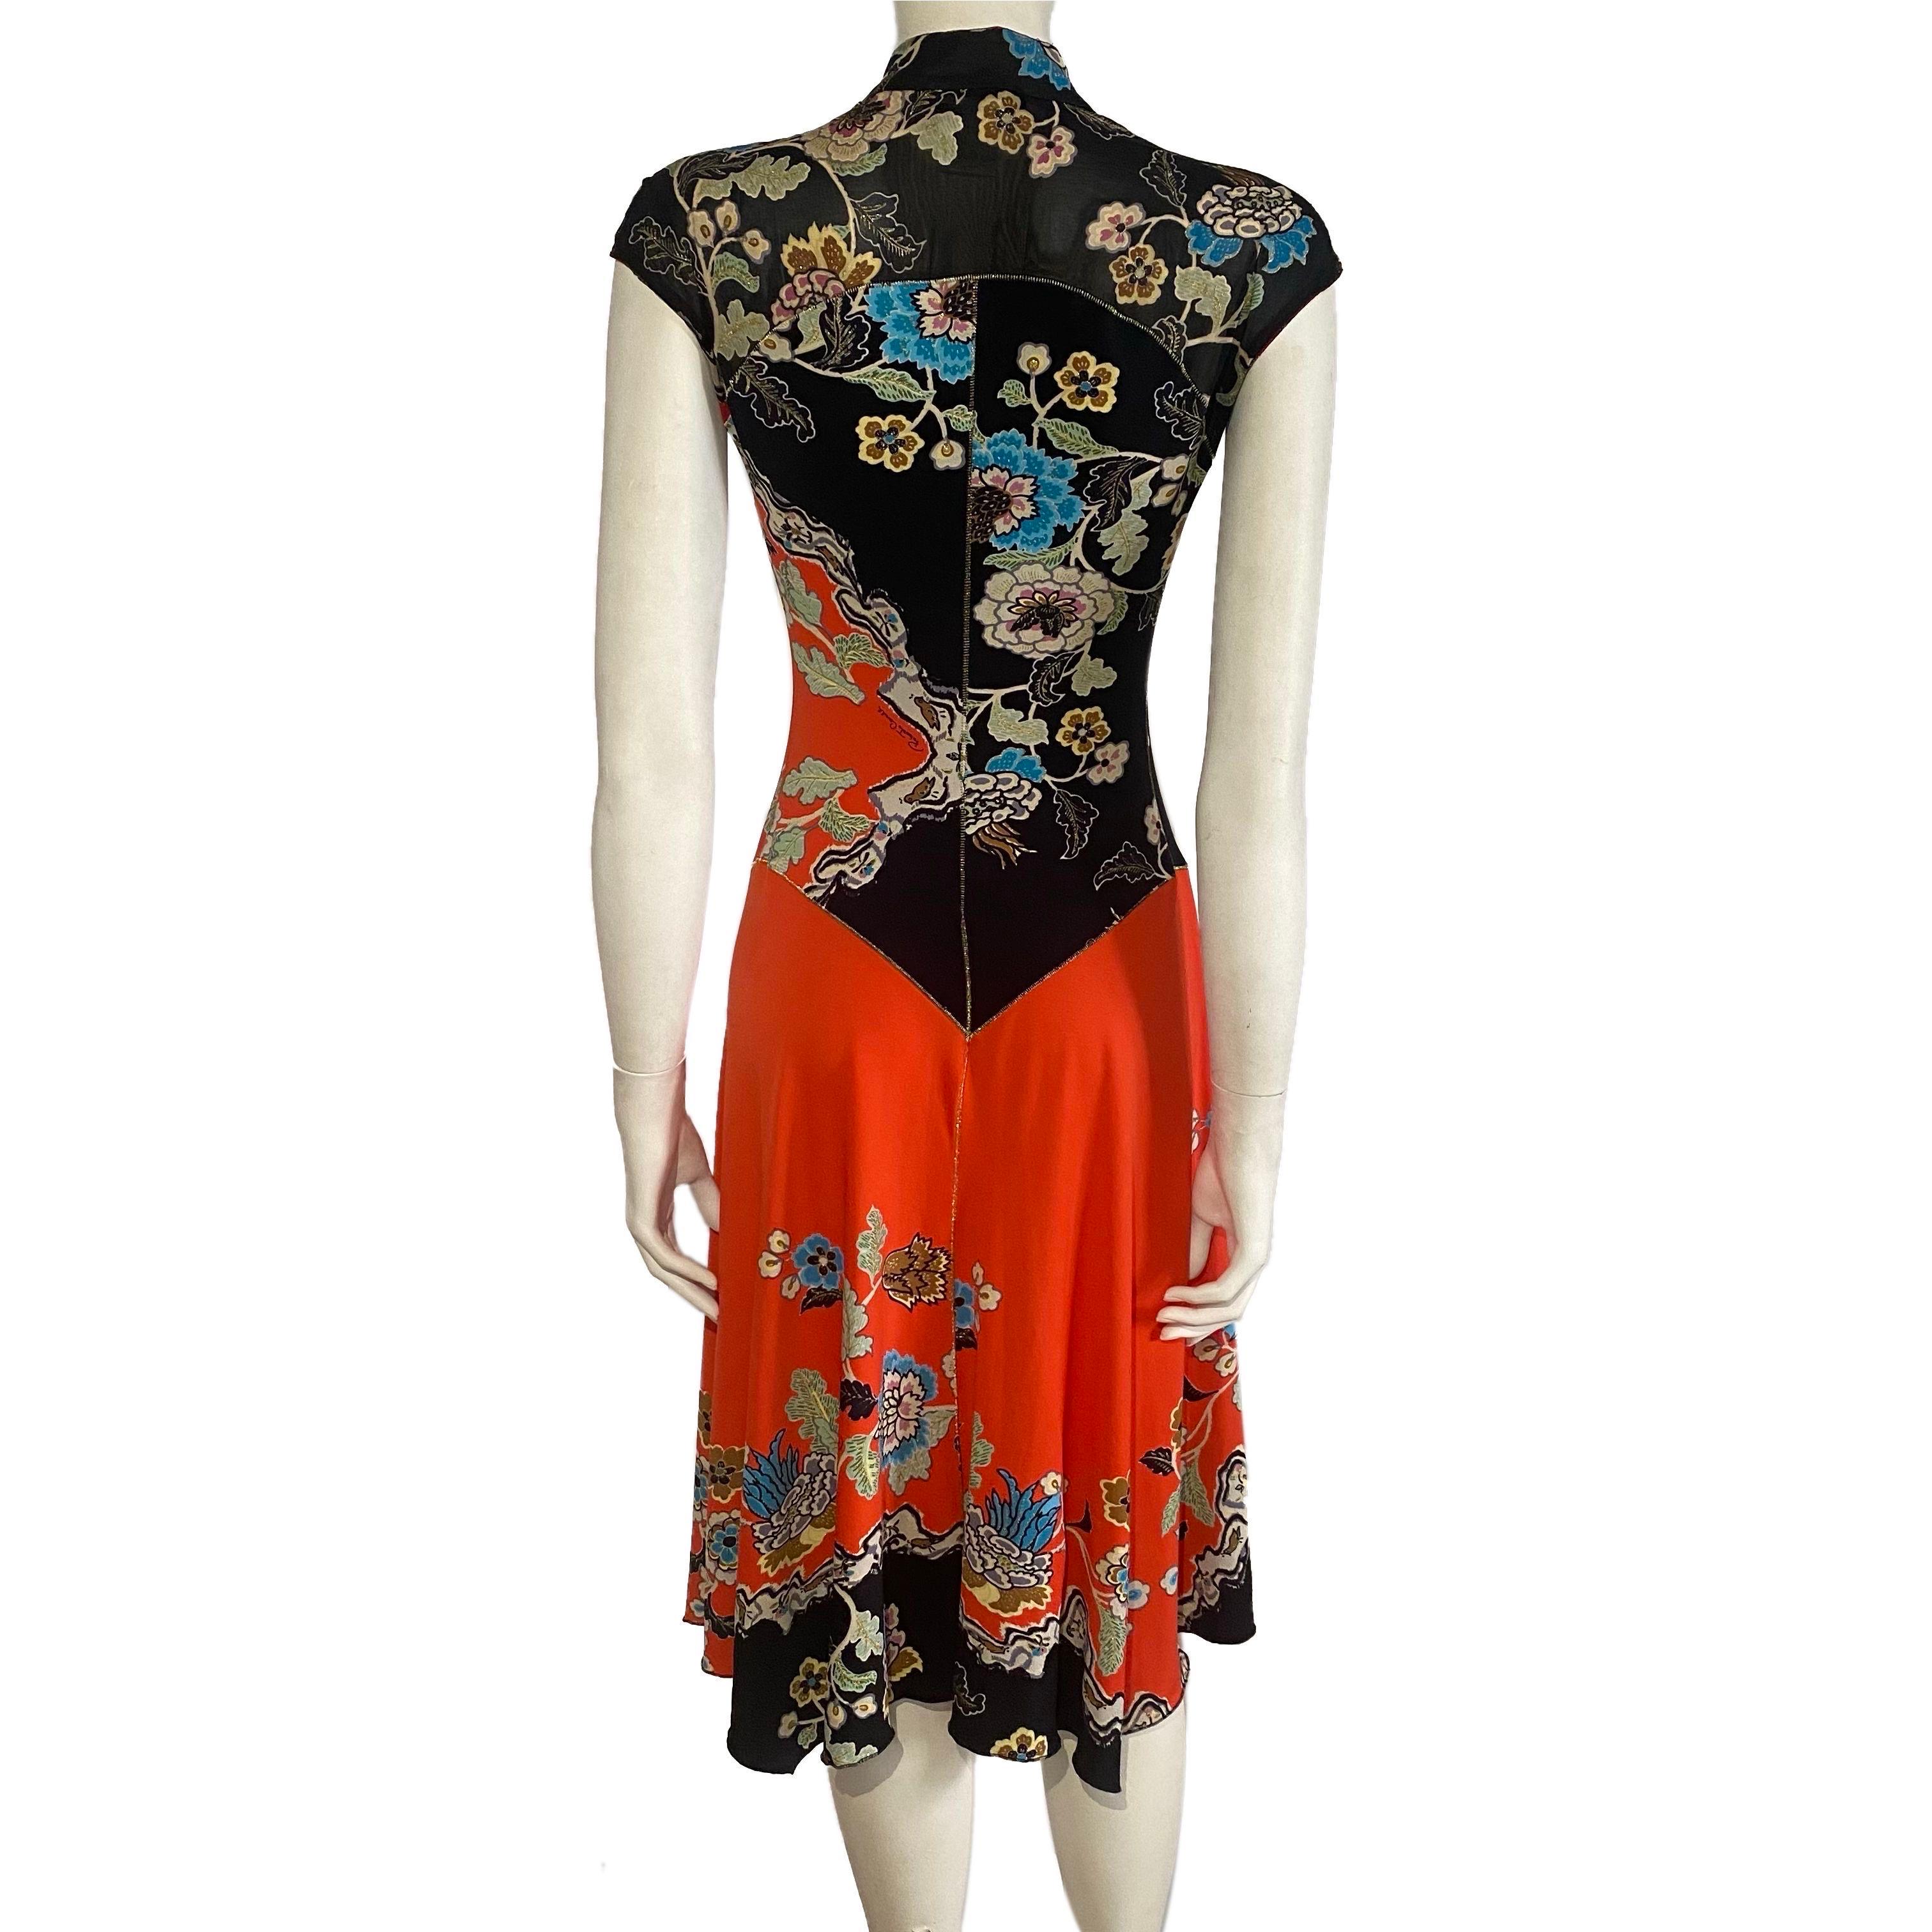 Roberto Cavalli cheongsam inspired red dress with red asian floral print from the Spring/Summer 2003 collection. Polyamide with silk sleeves and back, bias cut with lace charms.

Size XS, can fit bigger sizes

Bust: 76 cm / 29.9 inch
shoulder to